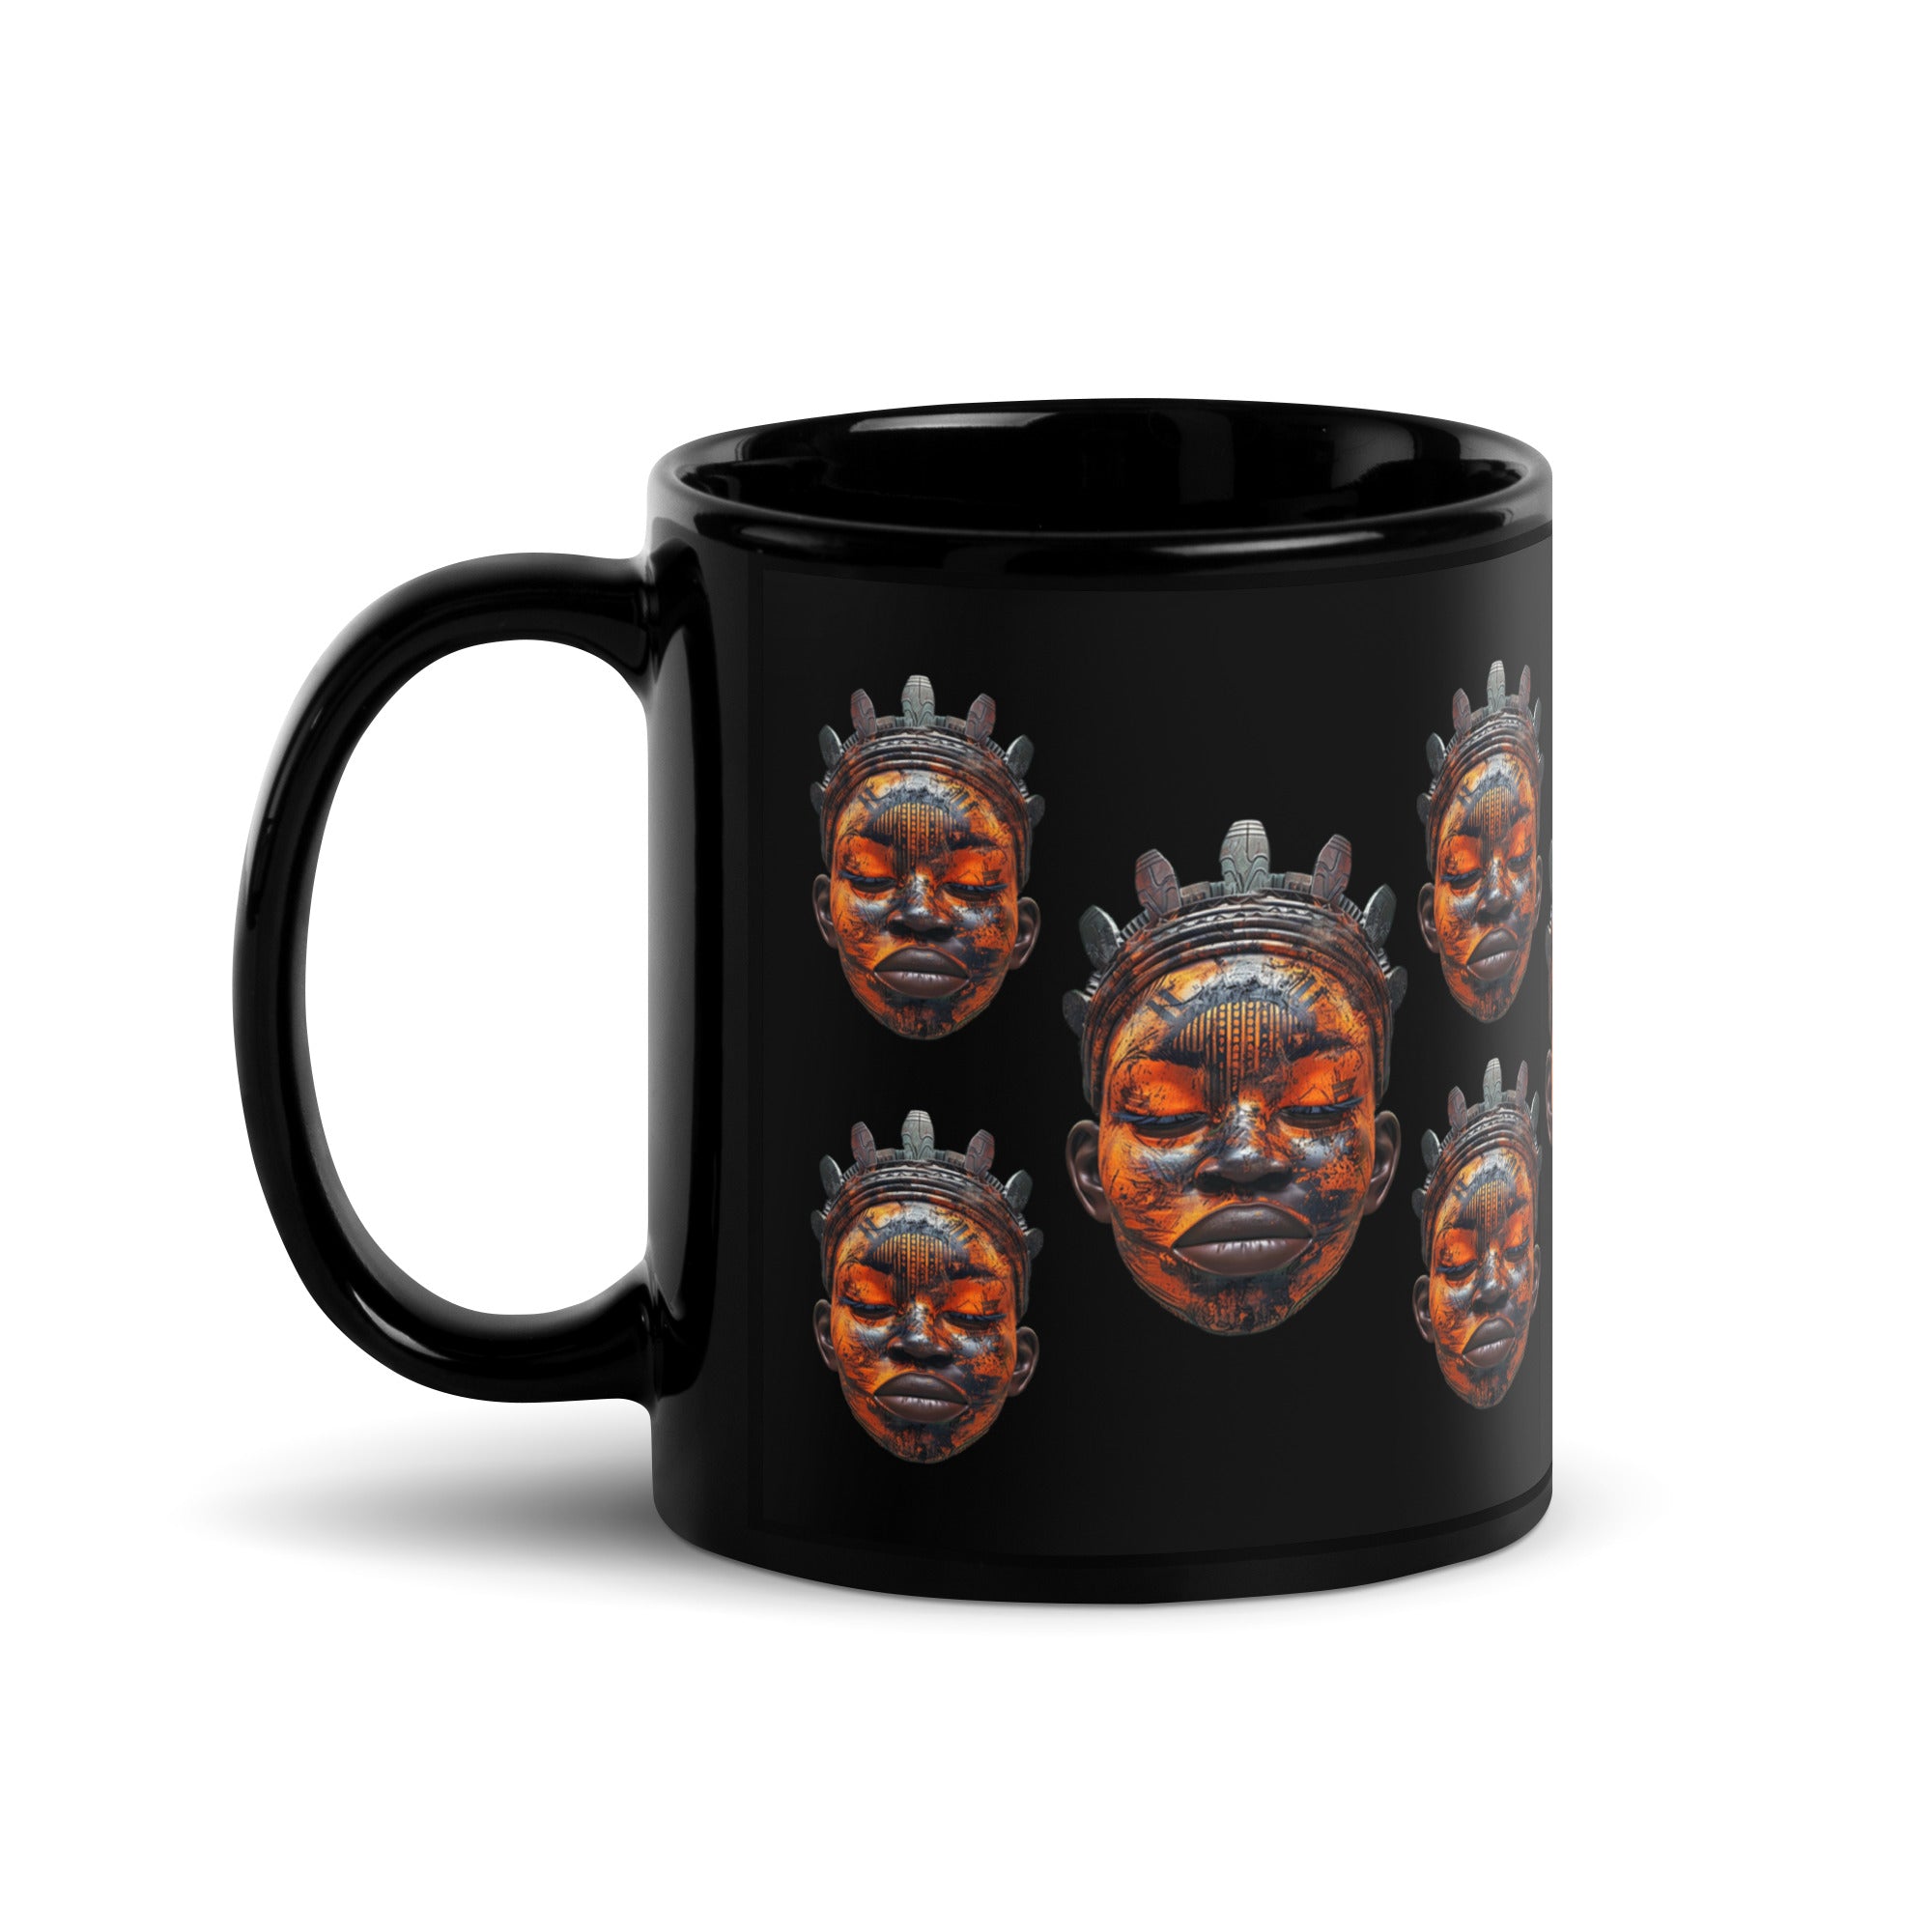 Experience the rich traditions of African artistry with every sip from our exquisitely designed African Mask Black Glossy Mug.